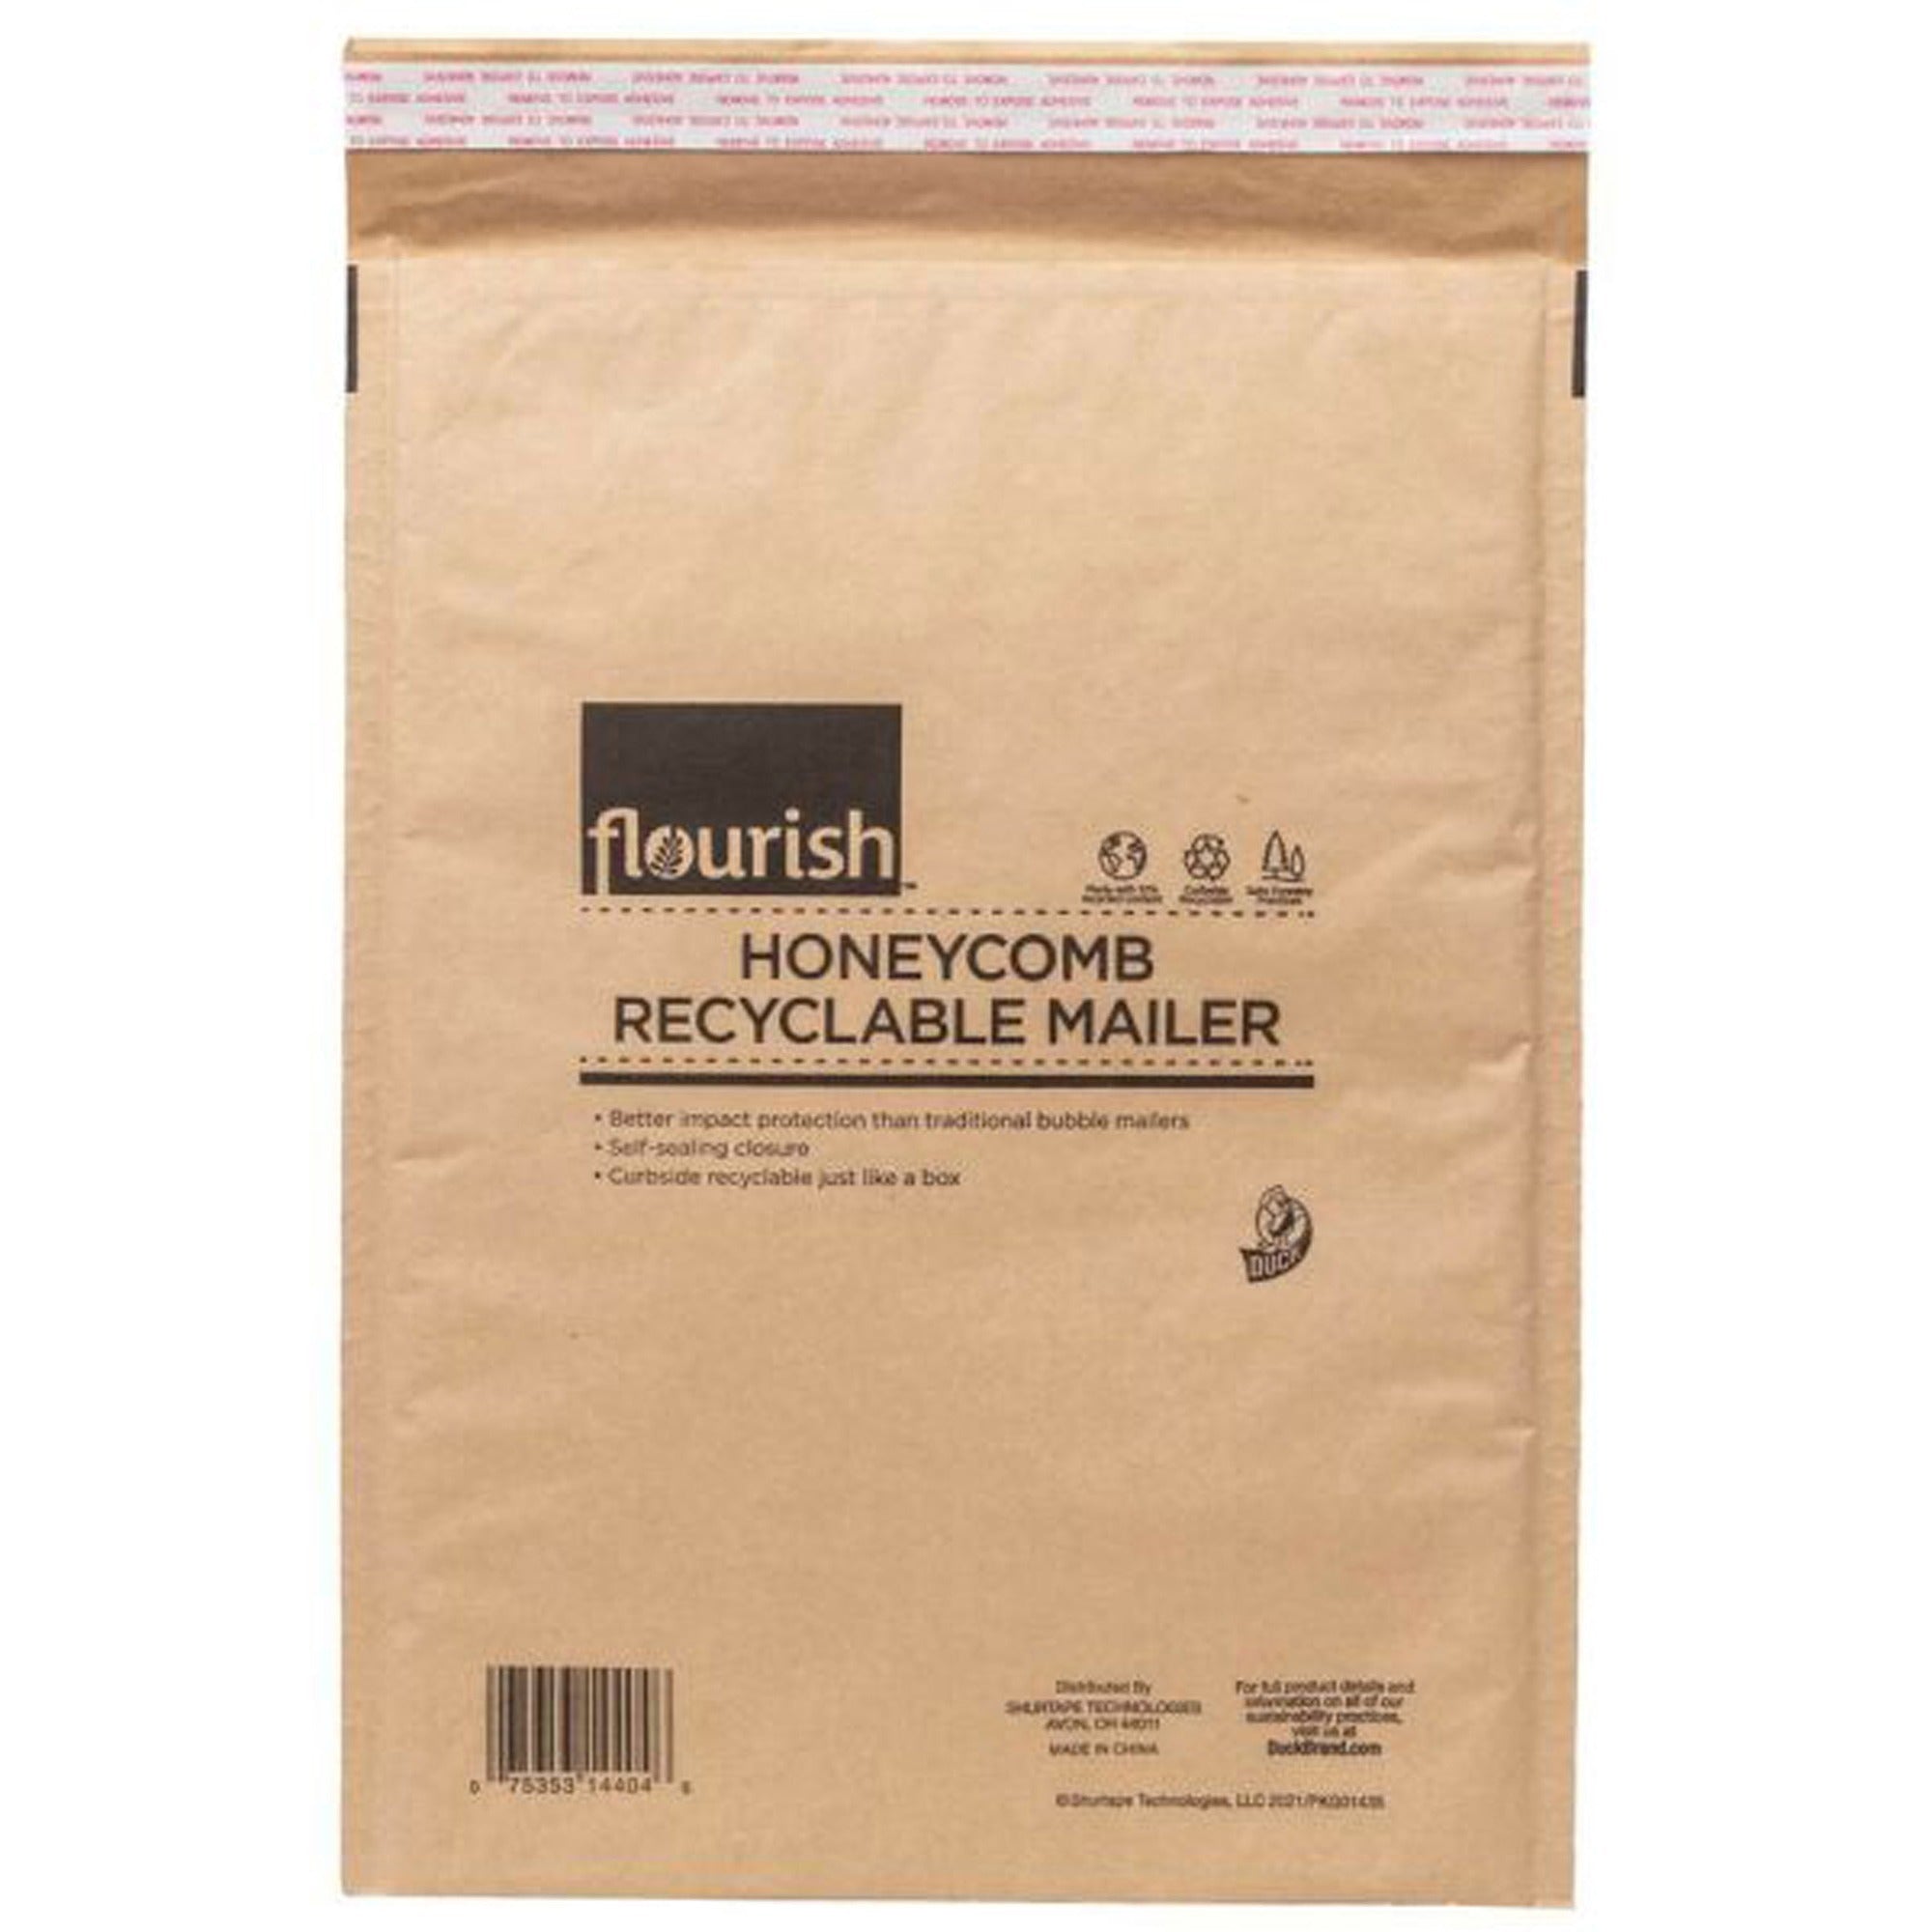 duck-brand-flourish-honeycomb-recyclable-mailers-mailing-shipping-14-4-5-length-flap-1-each-brown_duc287433 - 1